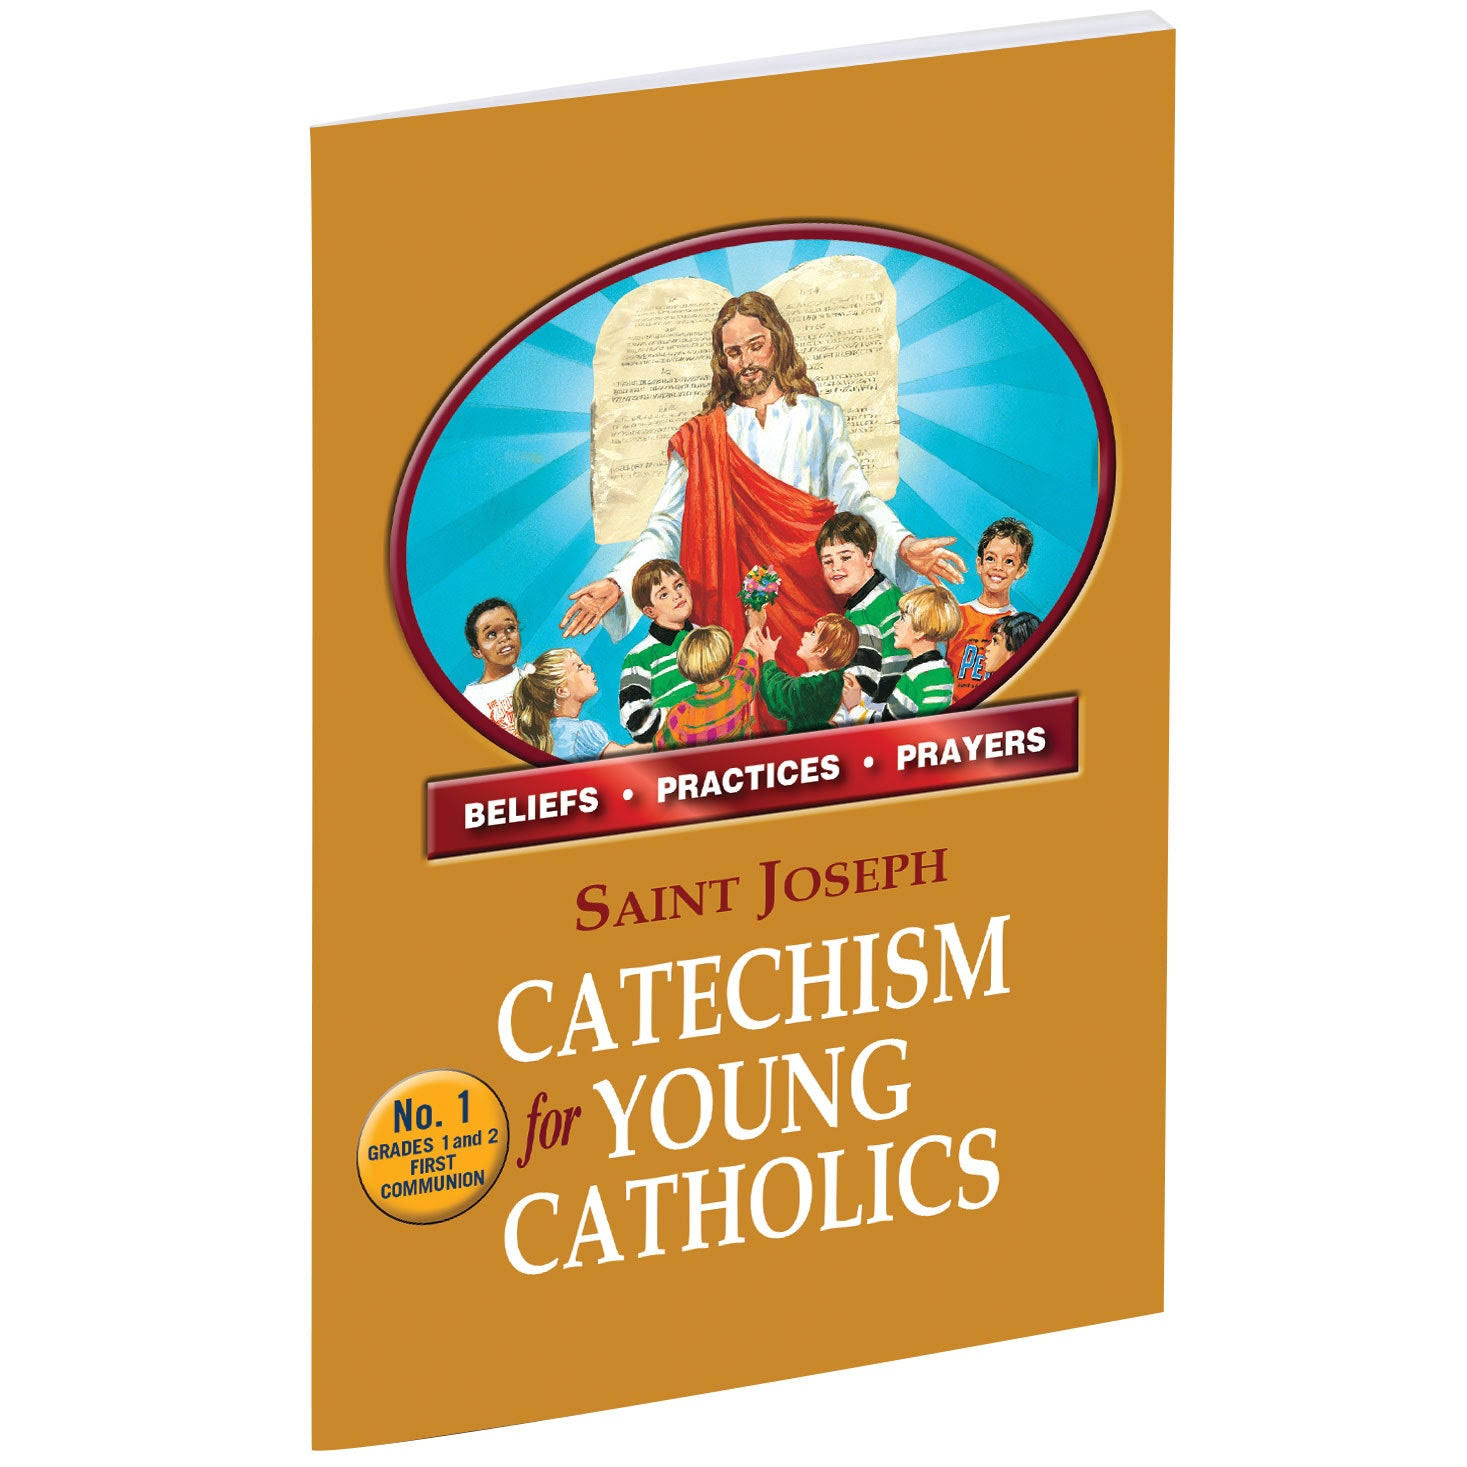 St. Joseph Catechism for Young Catholics: No. 1 [Book]